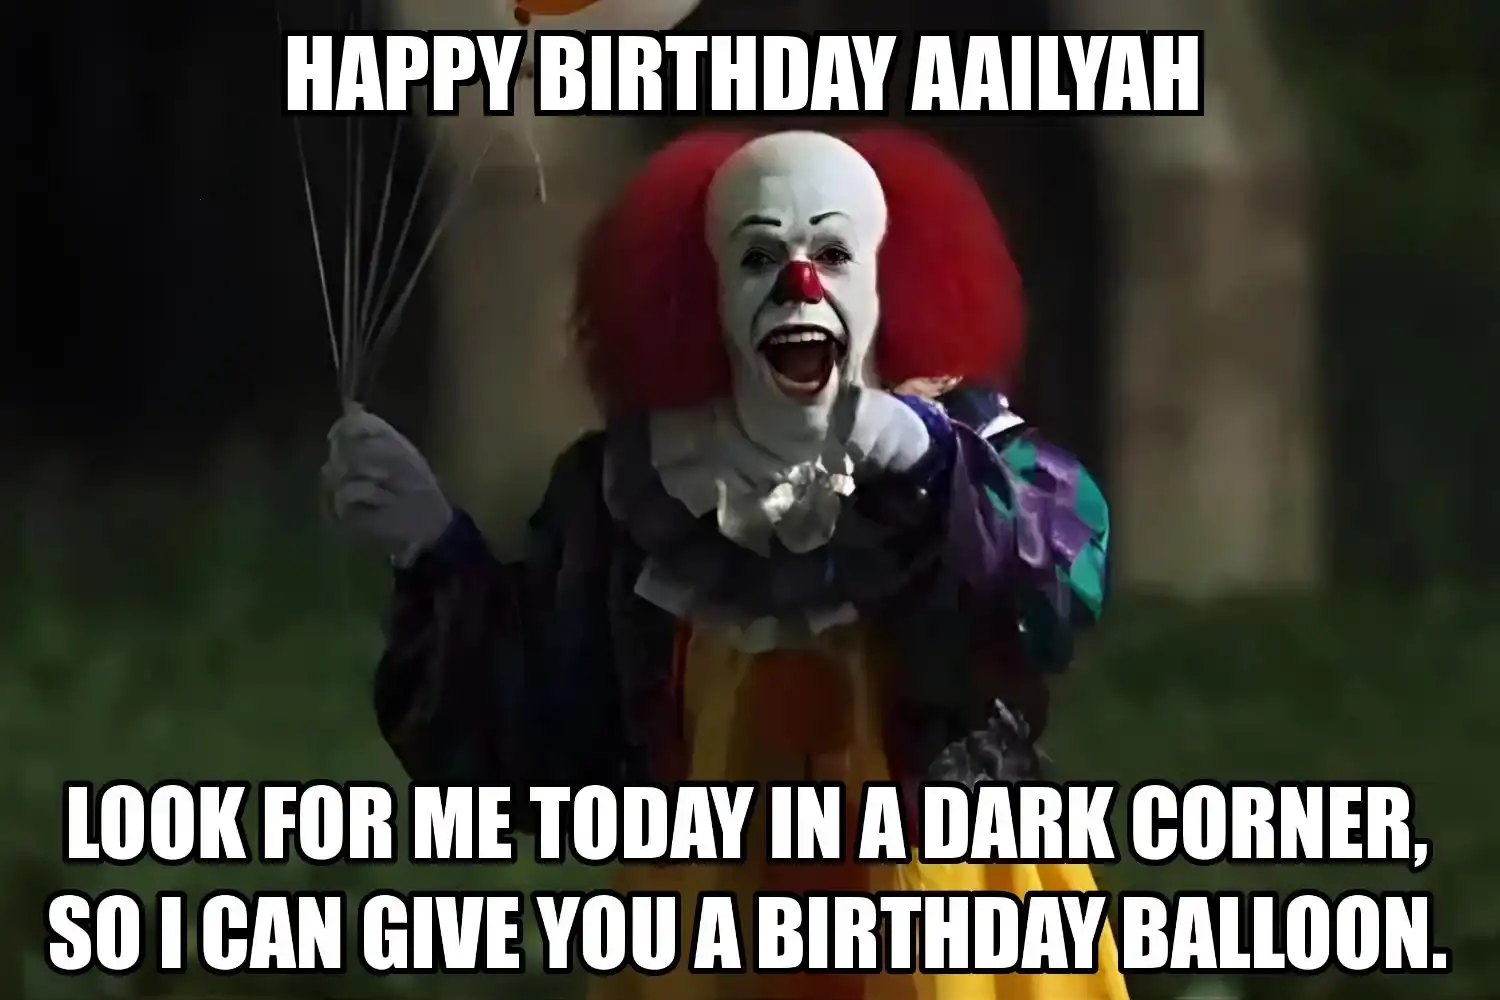 Happy Birthday Aailyah I Can Give You A Balloon Meme